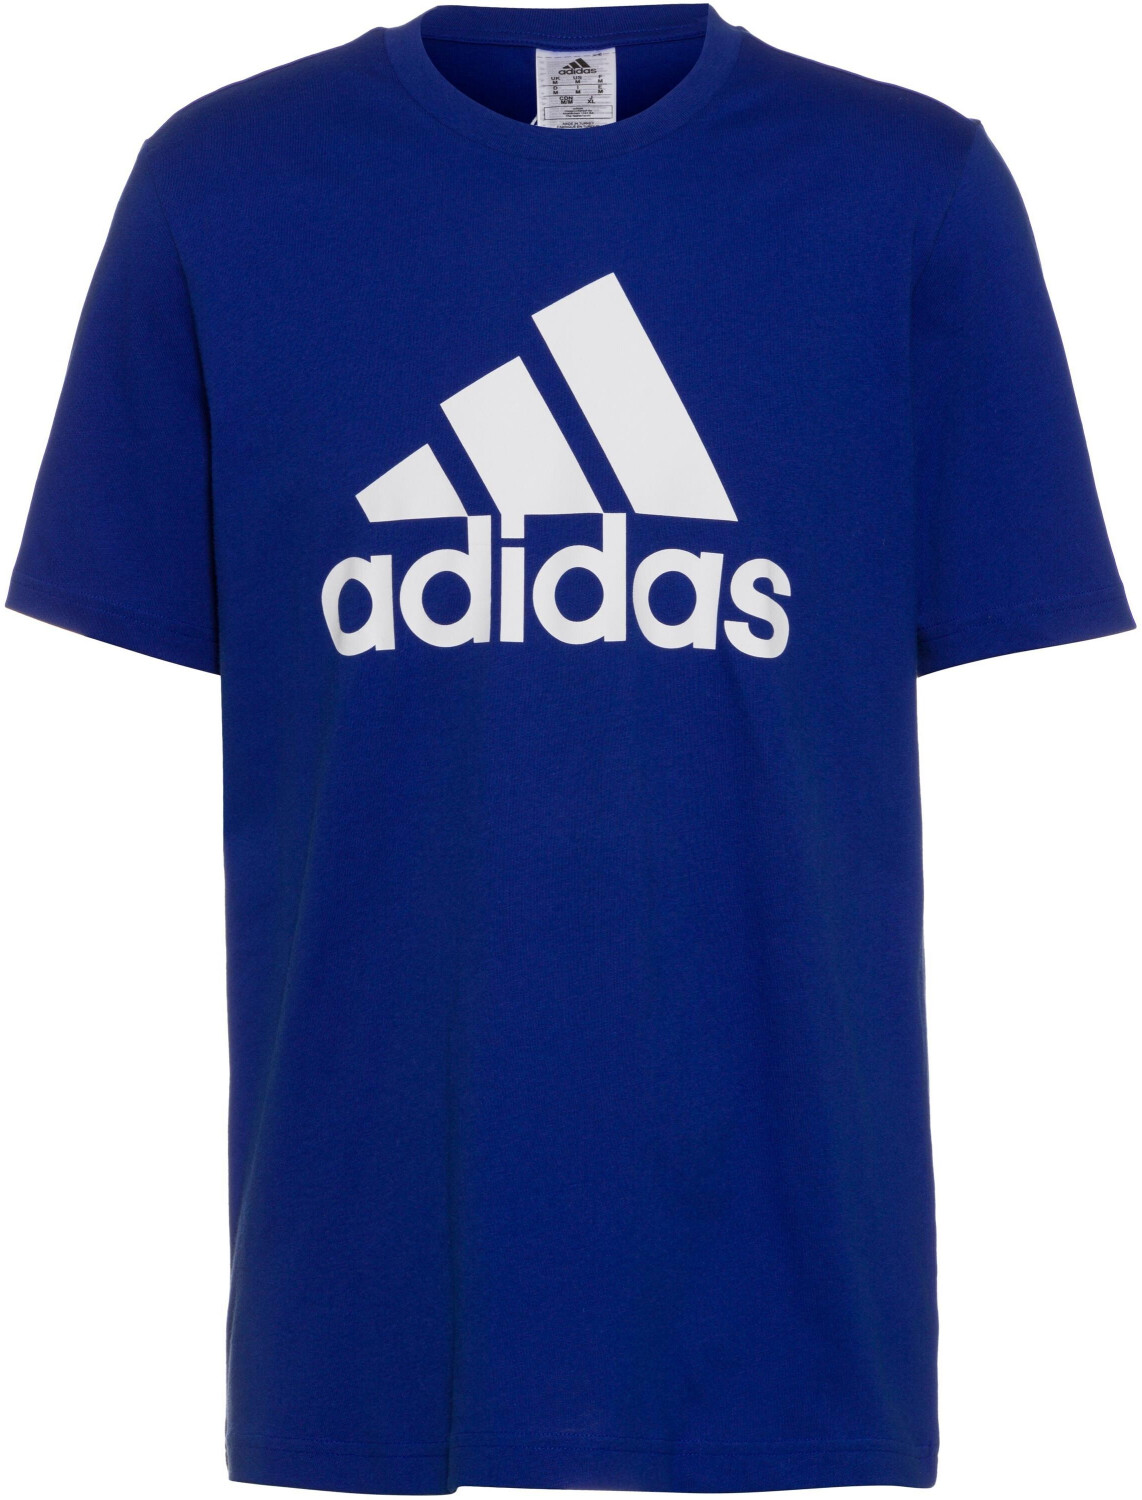 Buy Adidas Essentials Single Jersey Best Logo from Big (Today) T-Shirt £11.99 – on Deals